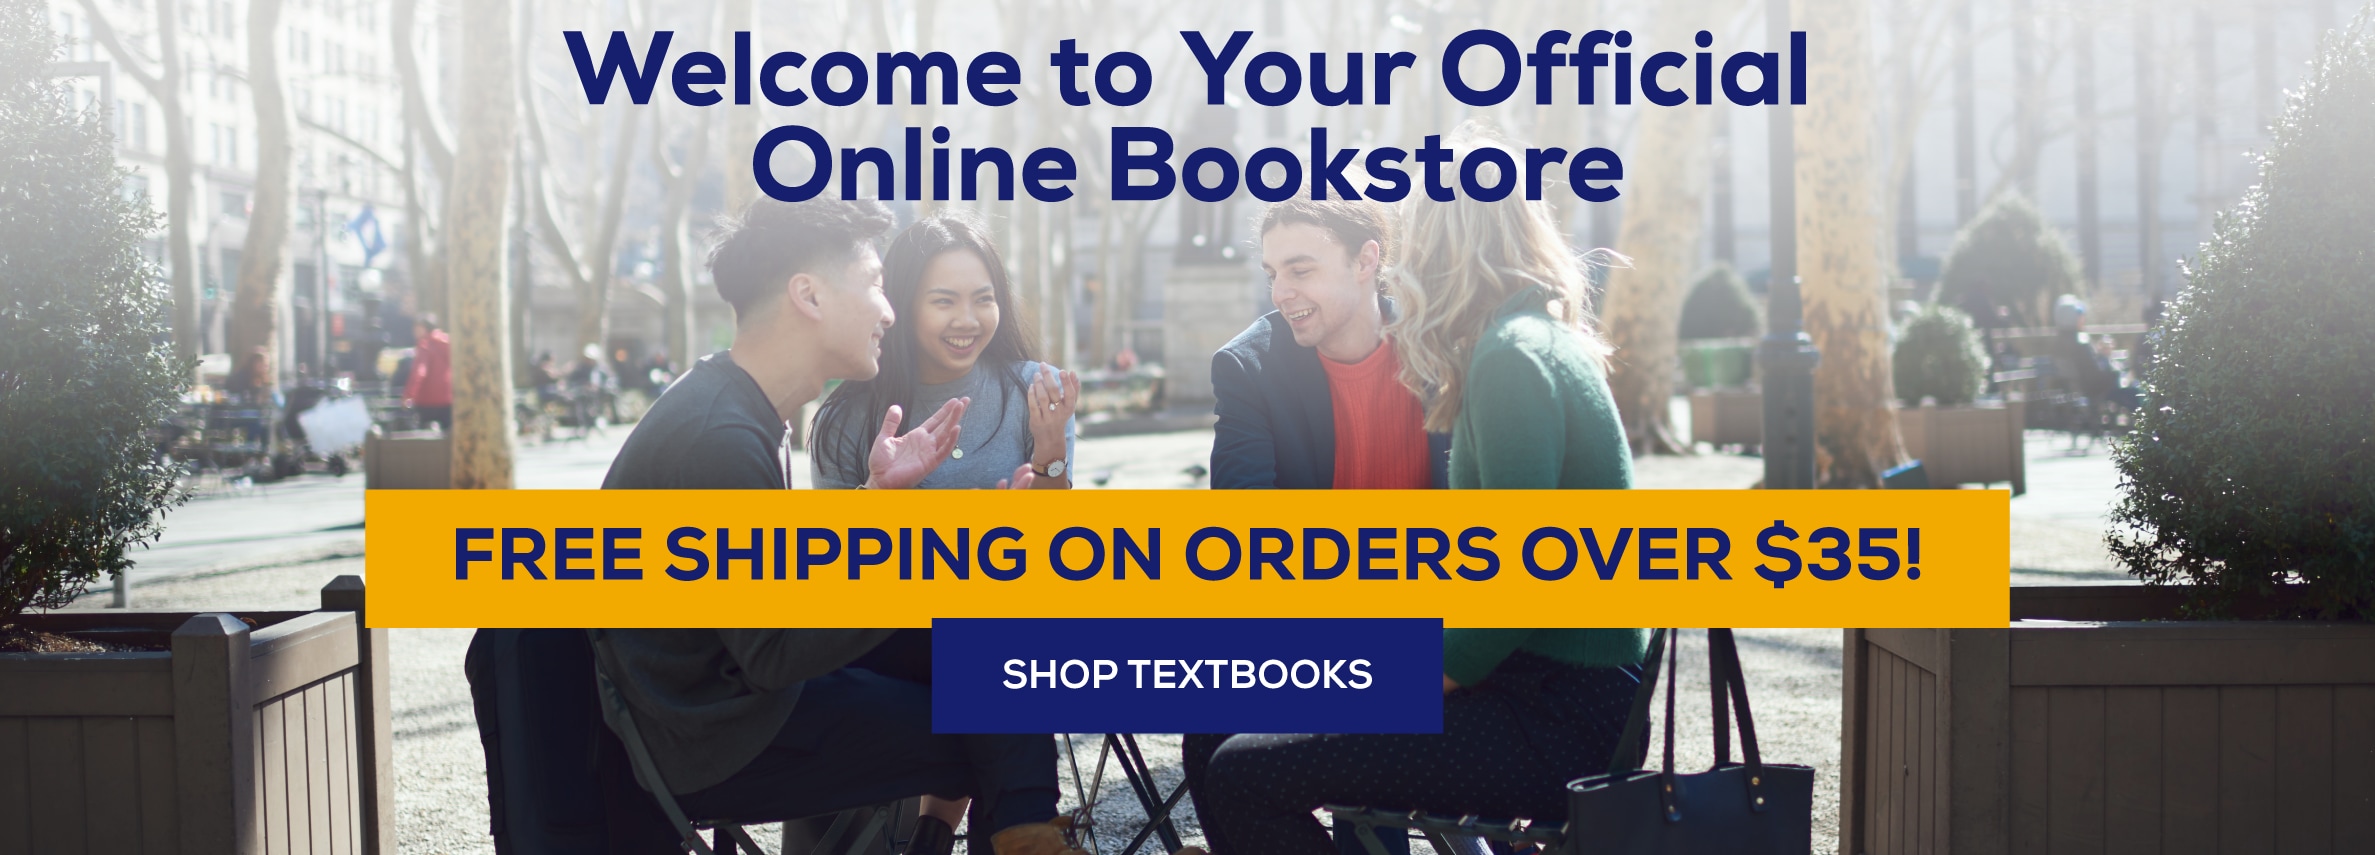 Welcome to Your Online Bookstore